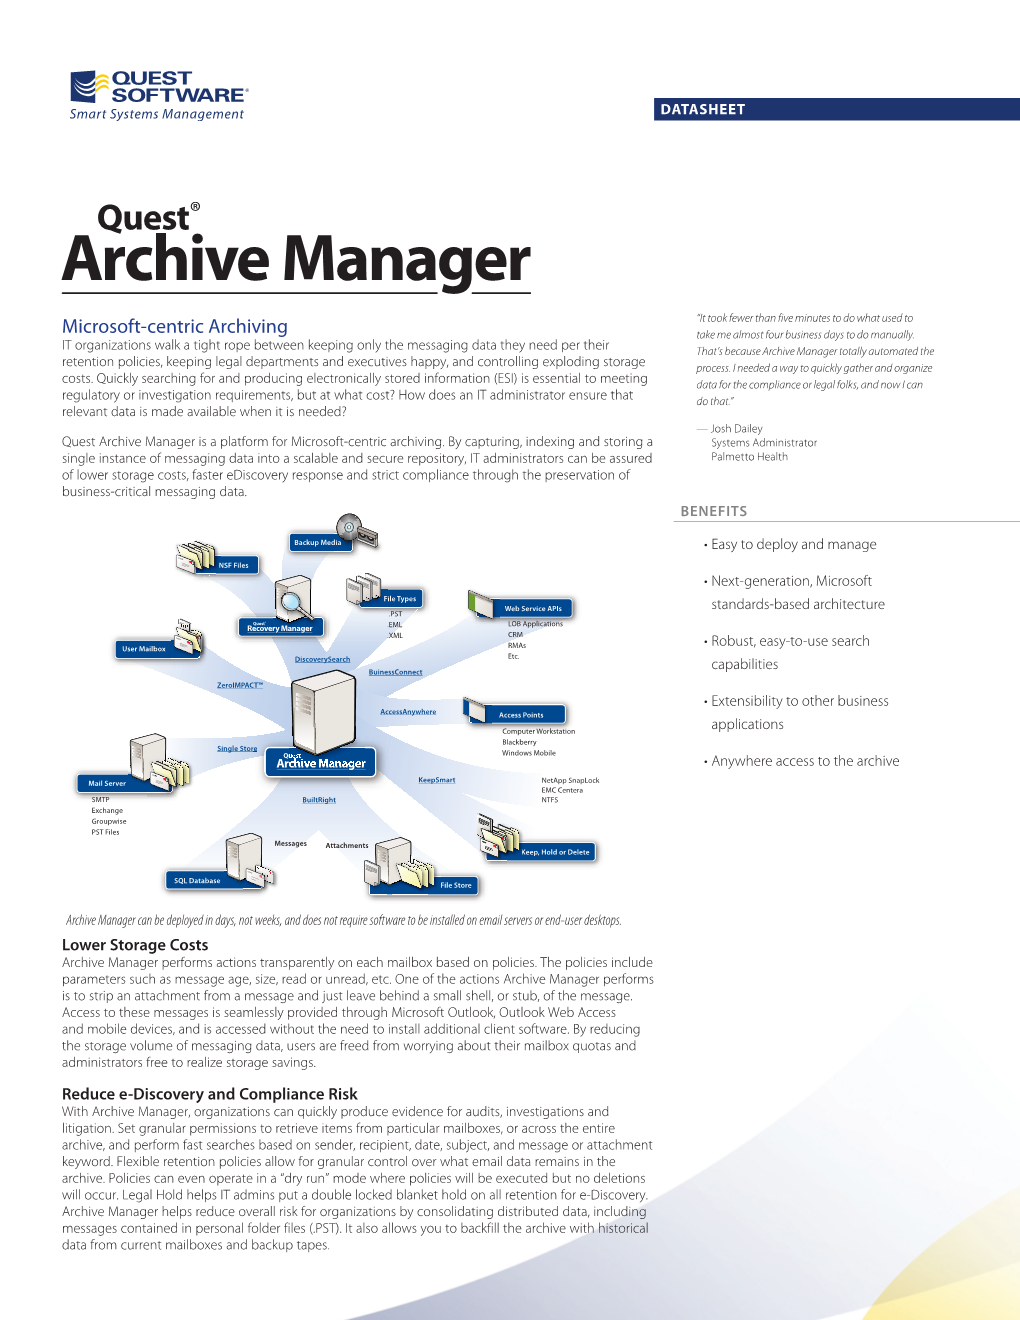 Microsoft-Centric Archiving Take Me Almost Four Business Days to Do Manually